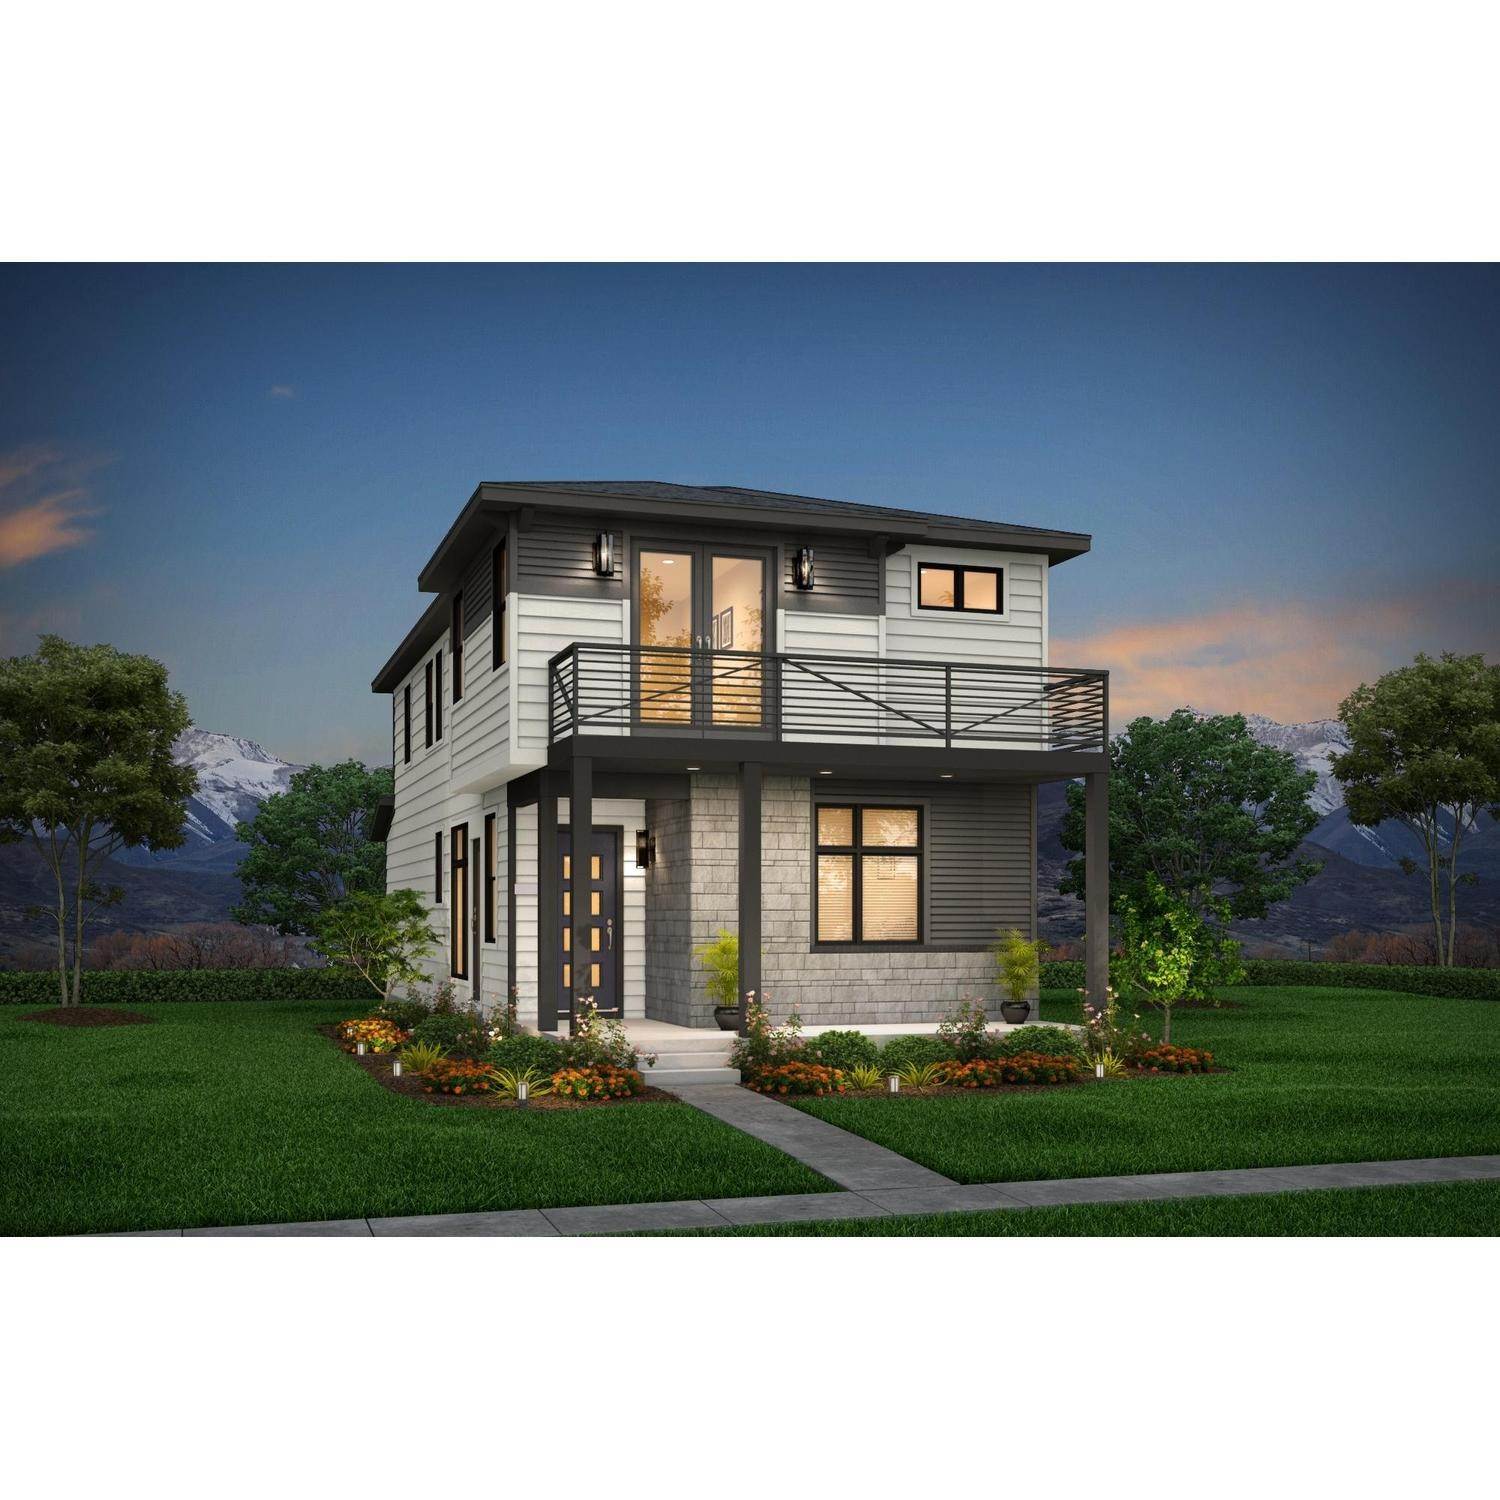 Single Family for Sale at Aurora, CO 80019